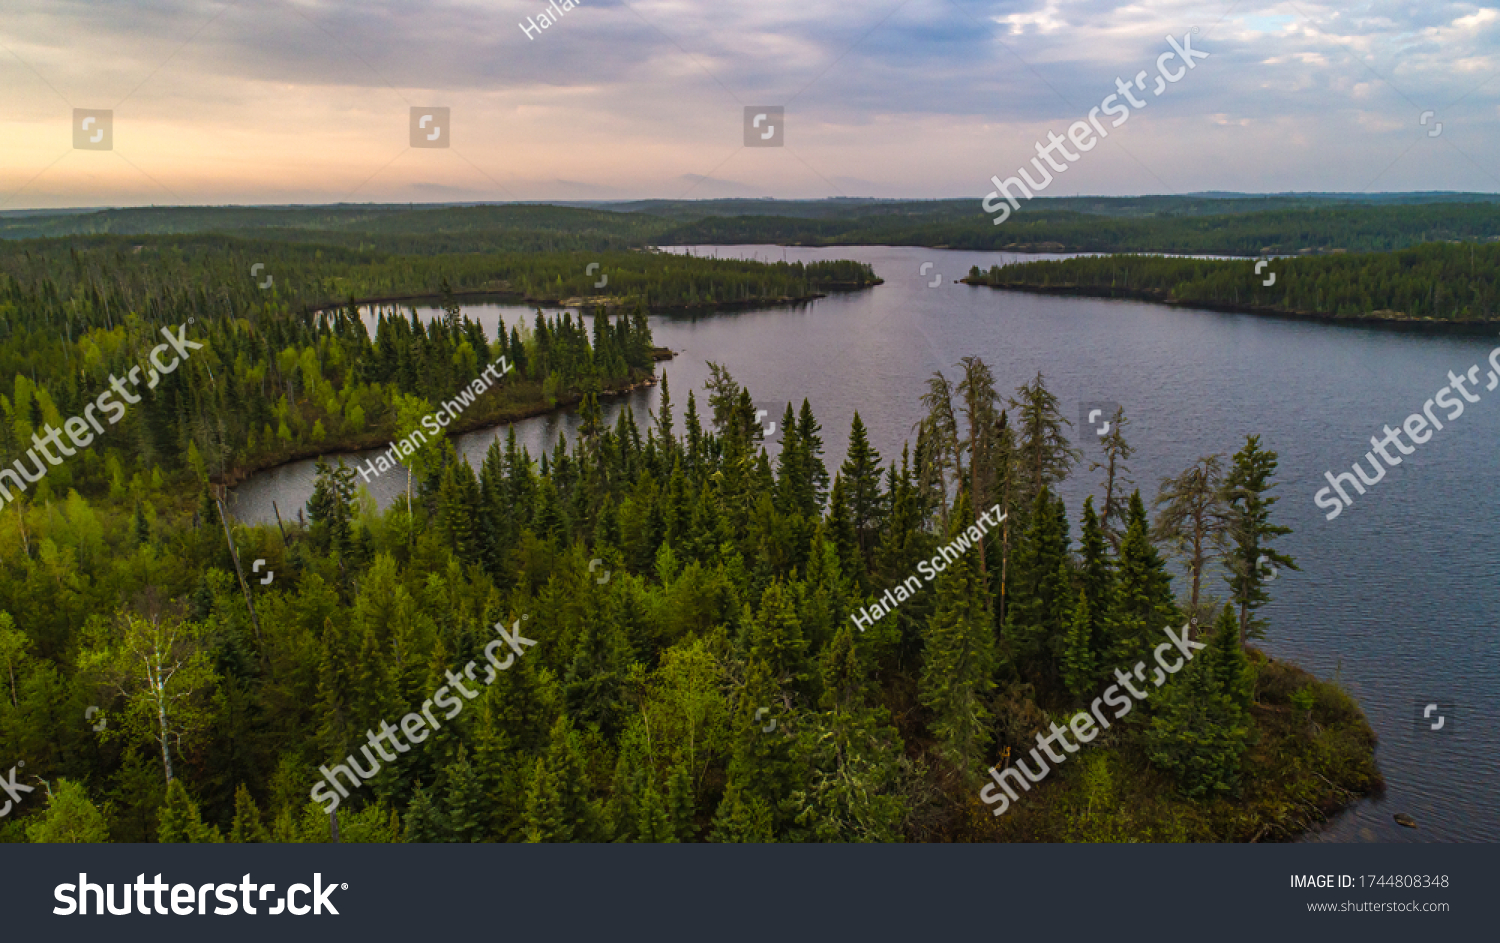 Drone / Aerial view of the northern Boreal Forest  #1744808348